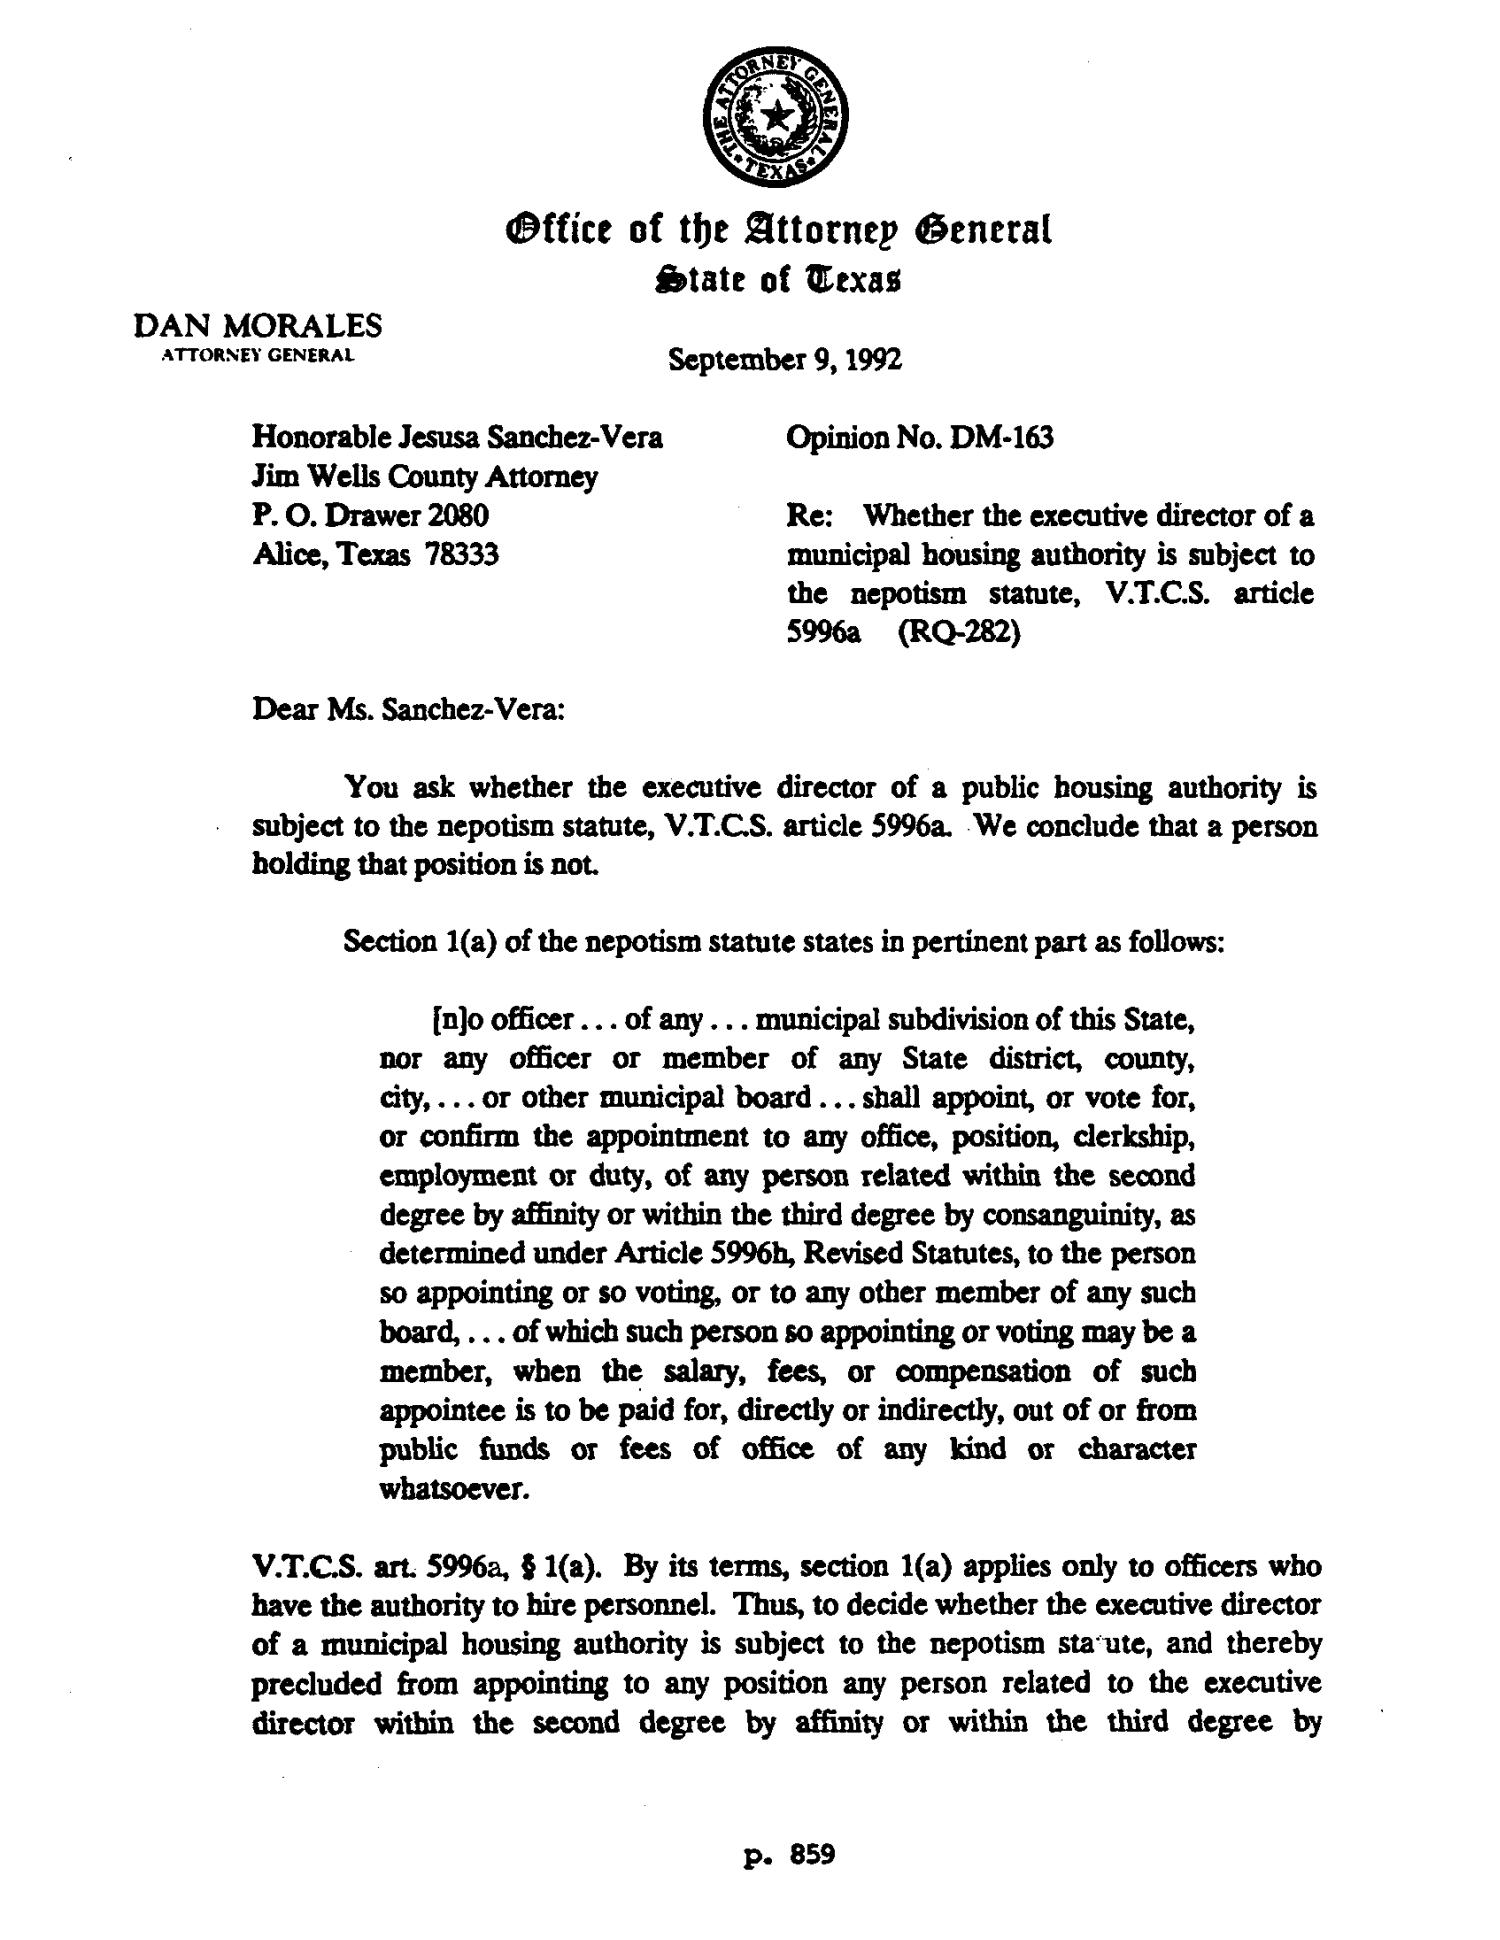 Texas Attorney General Opinion: DM-163
                                                
                                                    [Sequence #]: 1 of 3
                                                